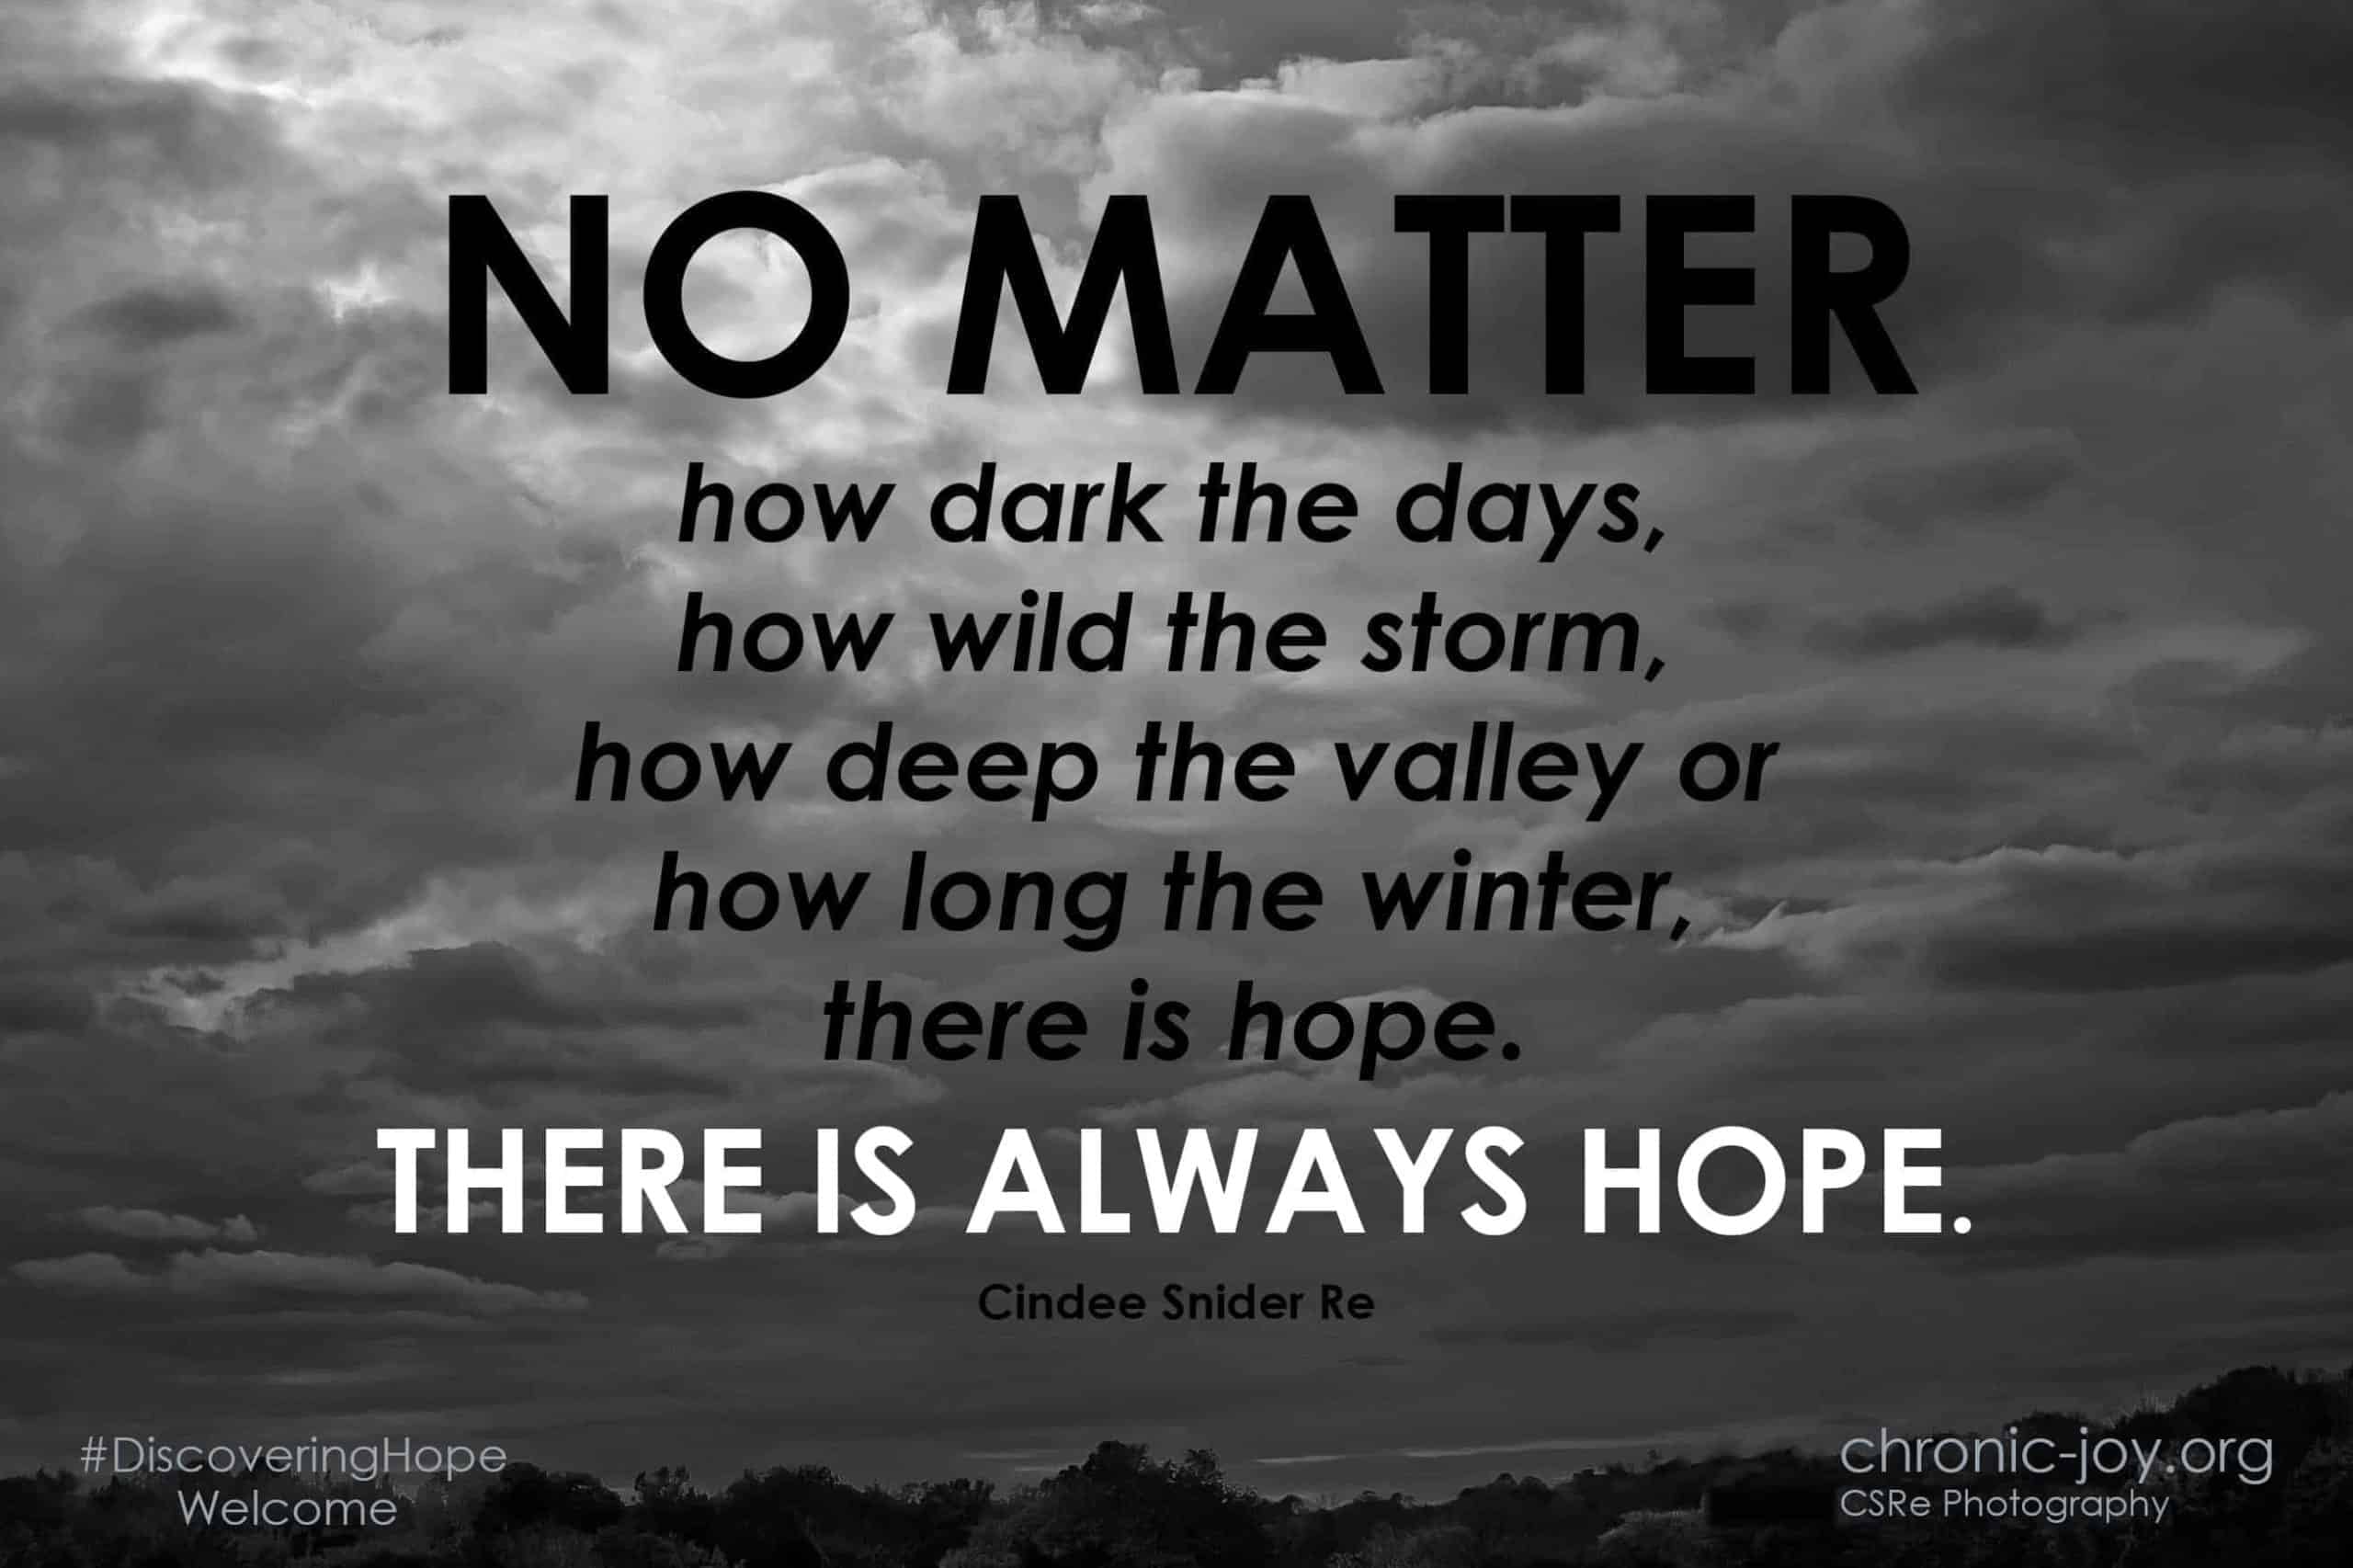 No matter how dark the days, there is HOPE!